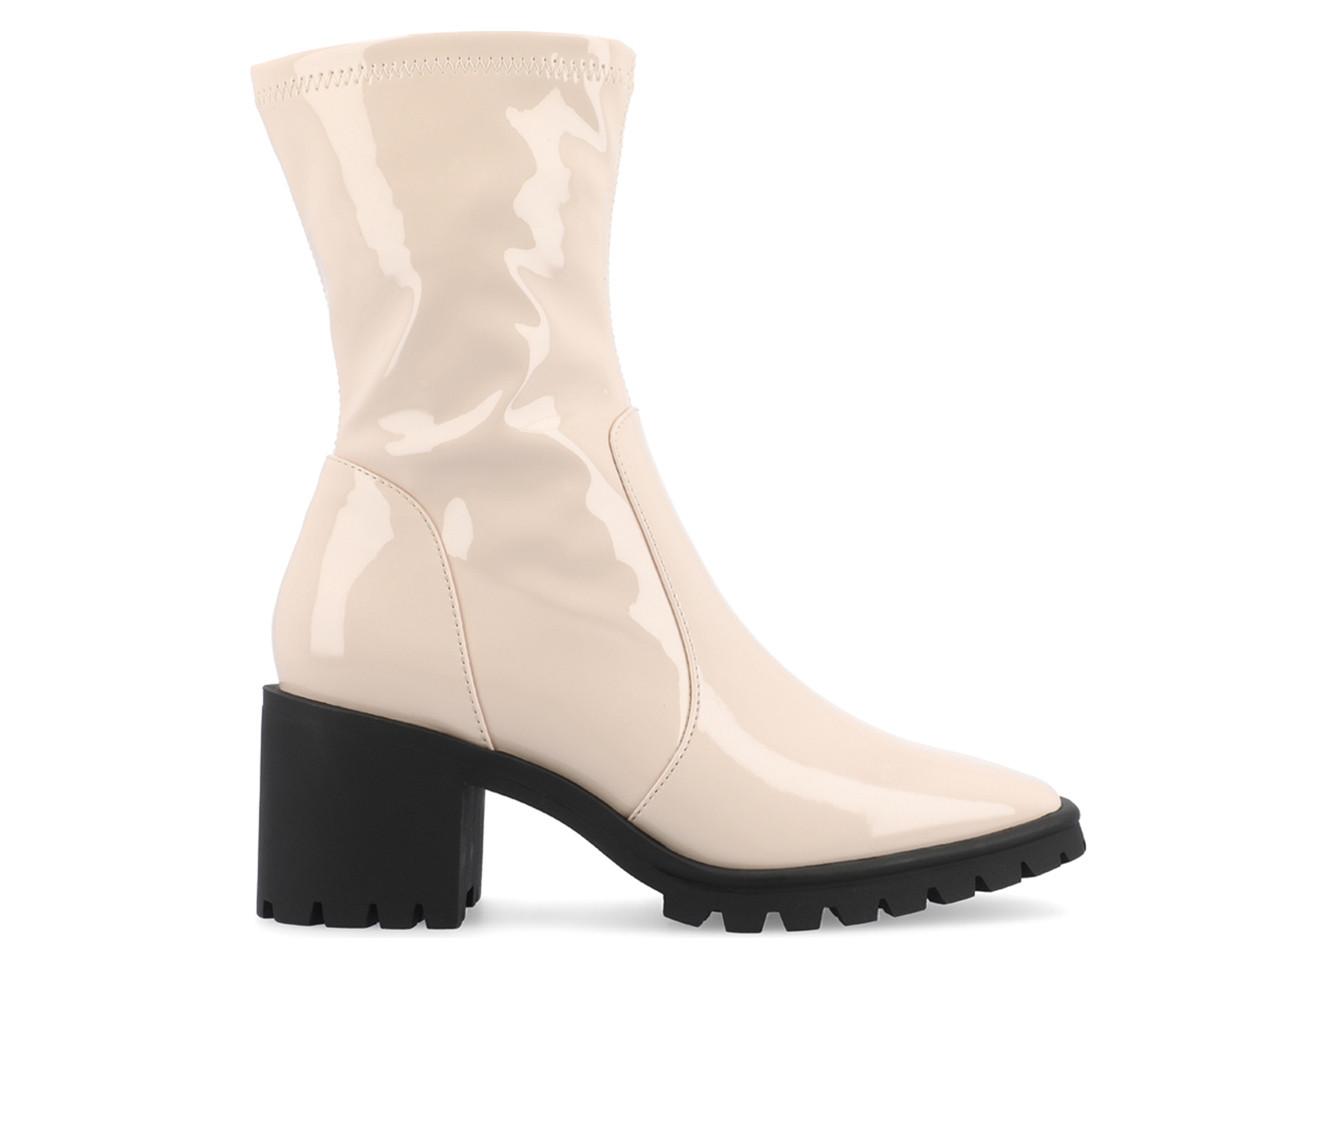 Women's Journee Collection Icelyn Mid Calf Heeled Boots